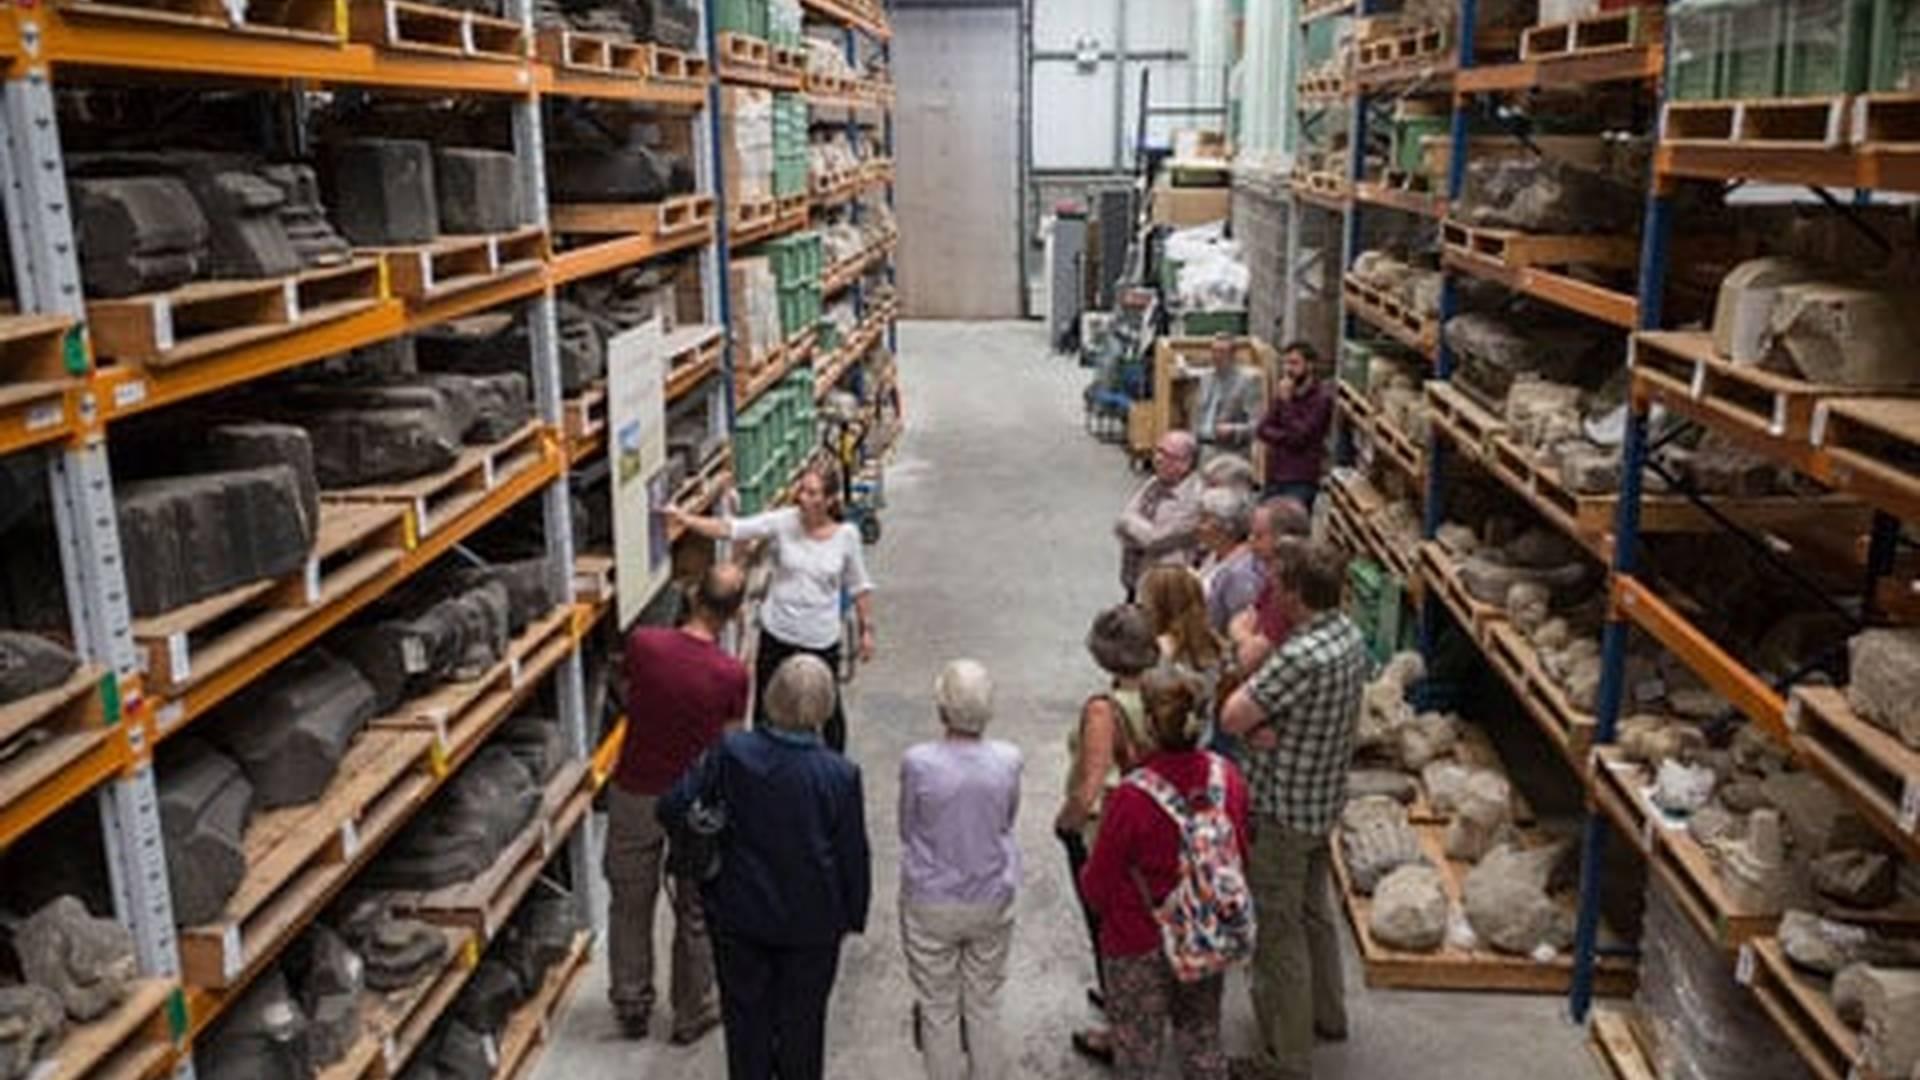 Helmsley Archaeology Store Tours | Hoop